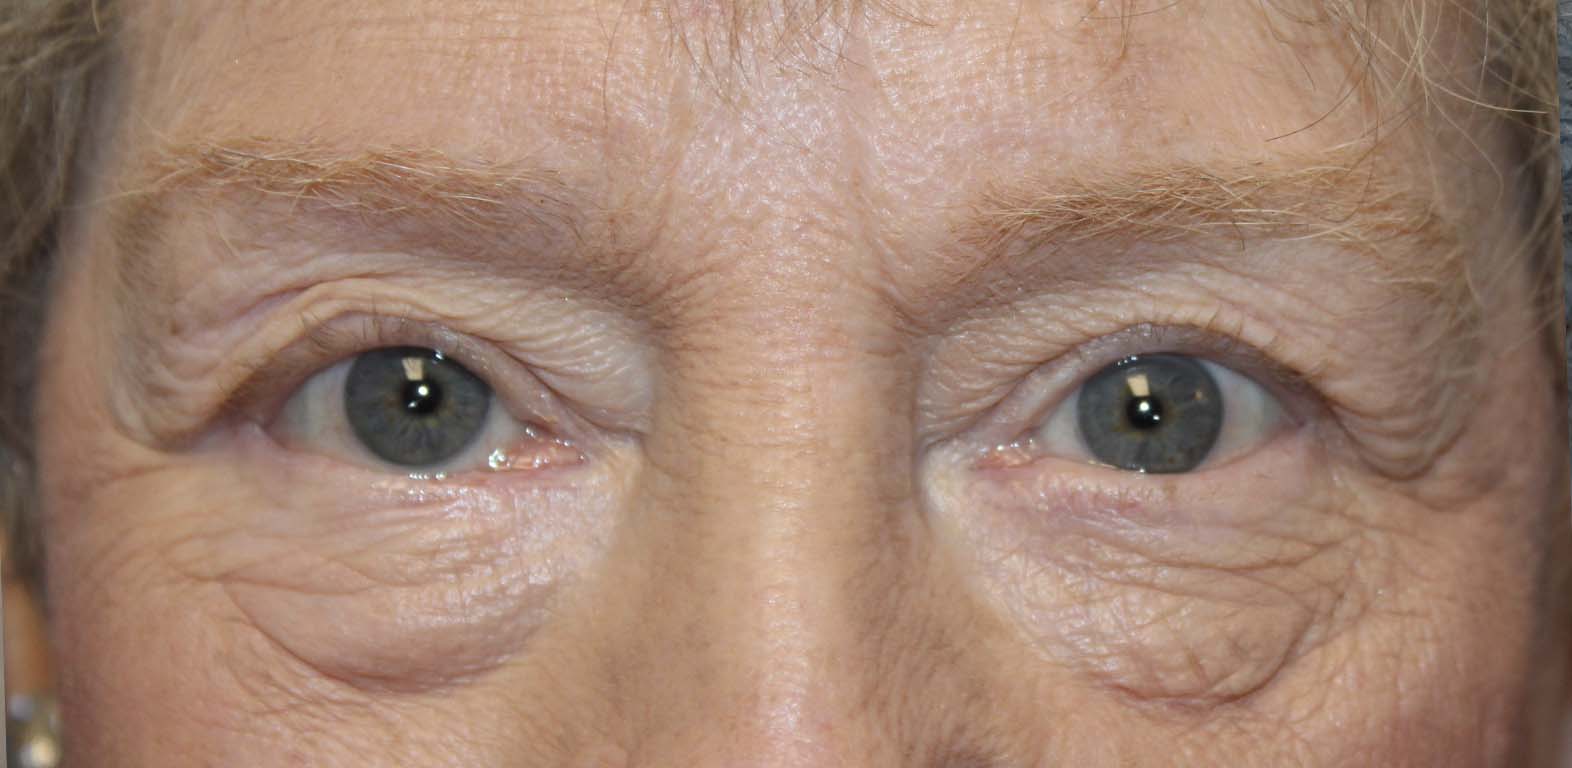 70 year old woman close up of eyes